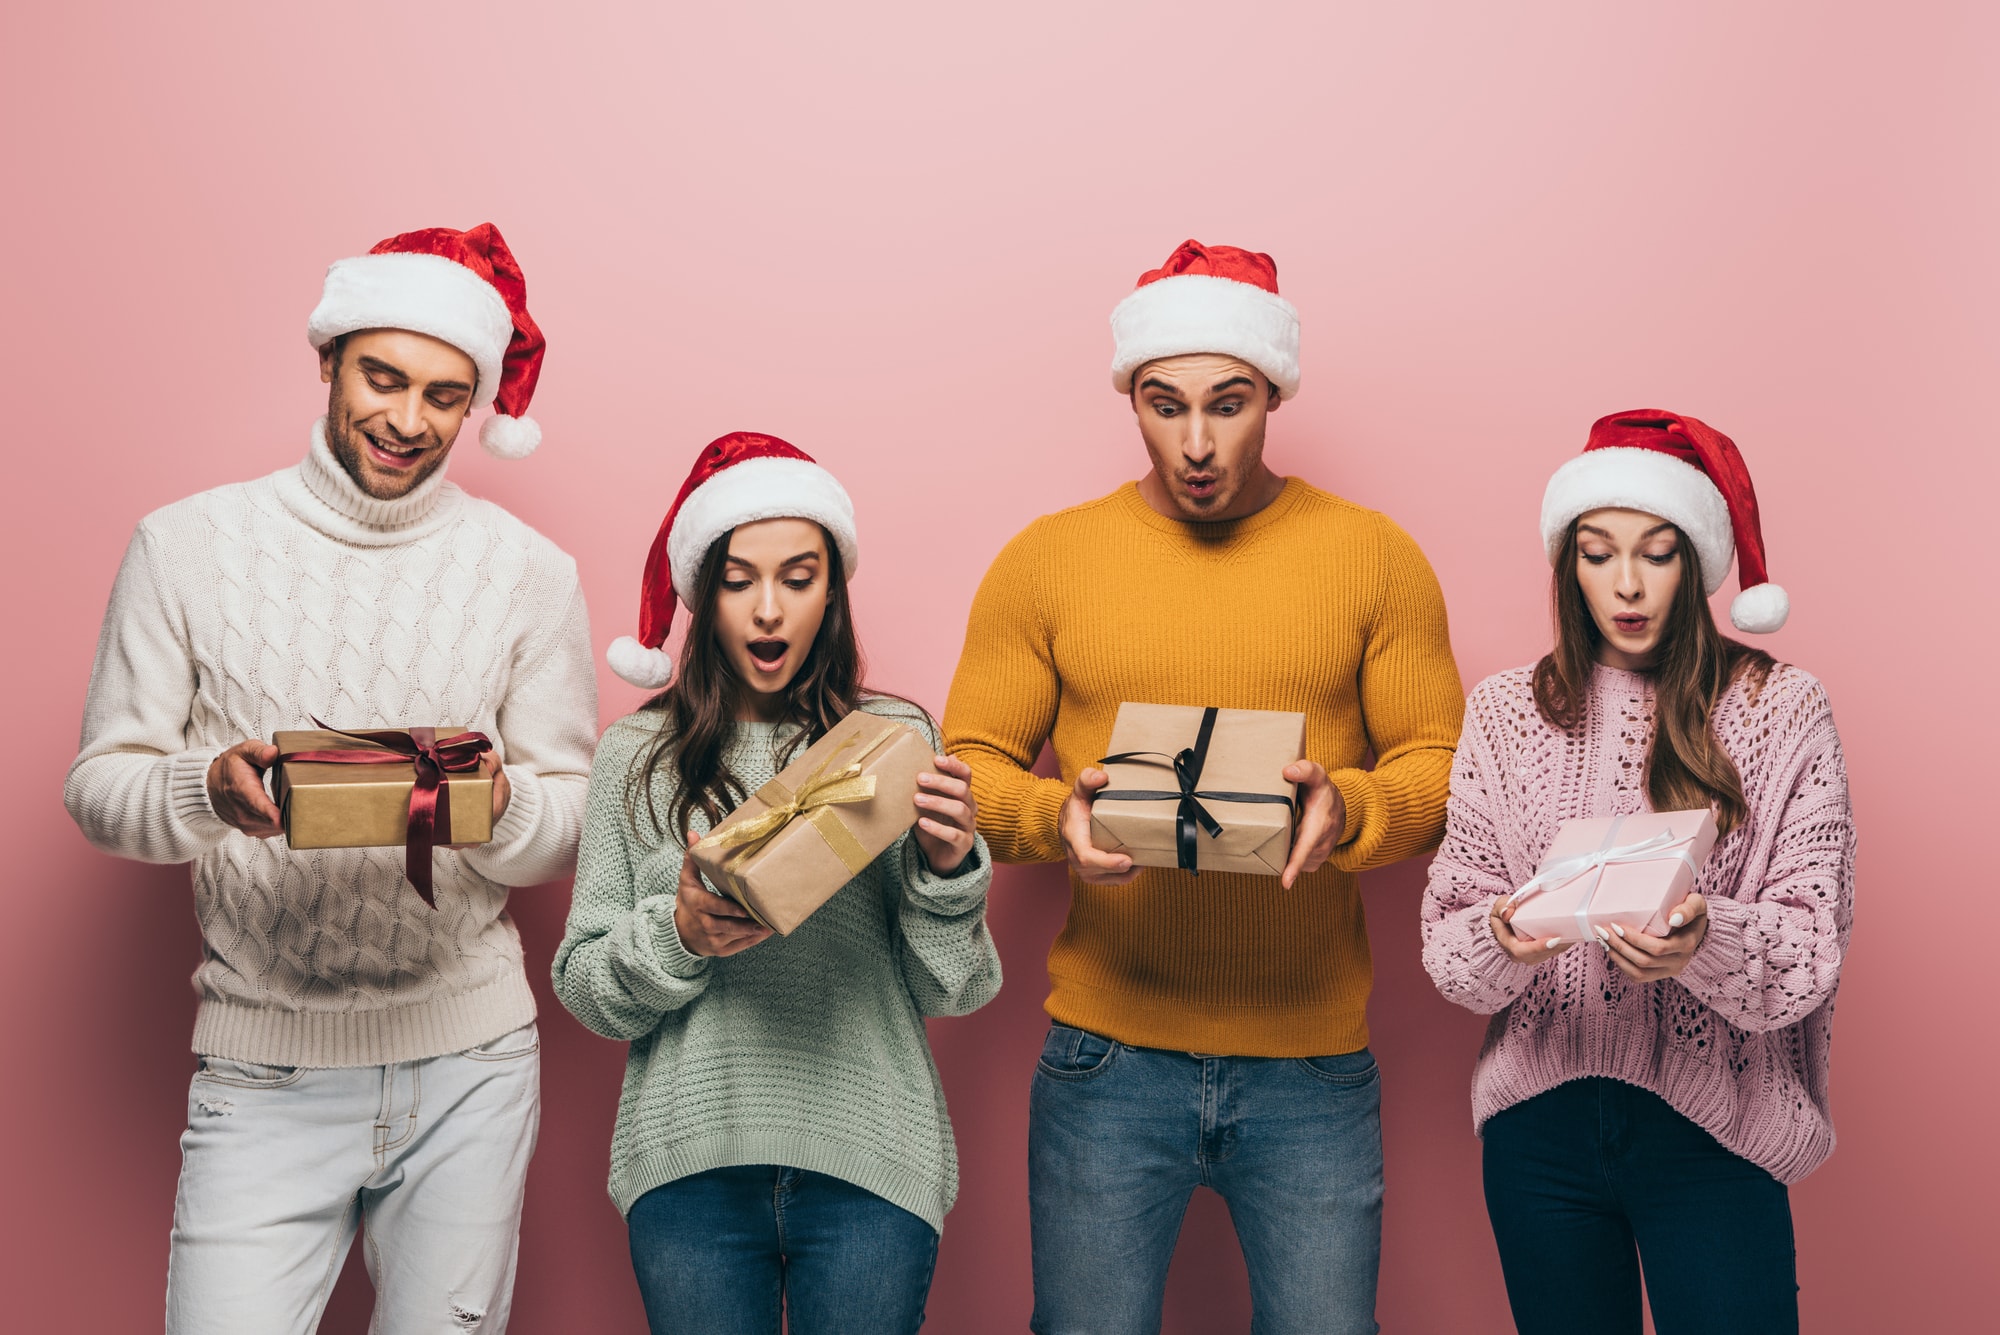 people excitedly holding Christmas white elephant gifts for exchange